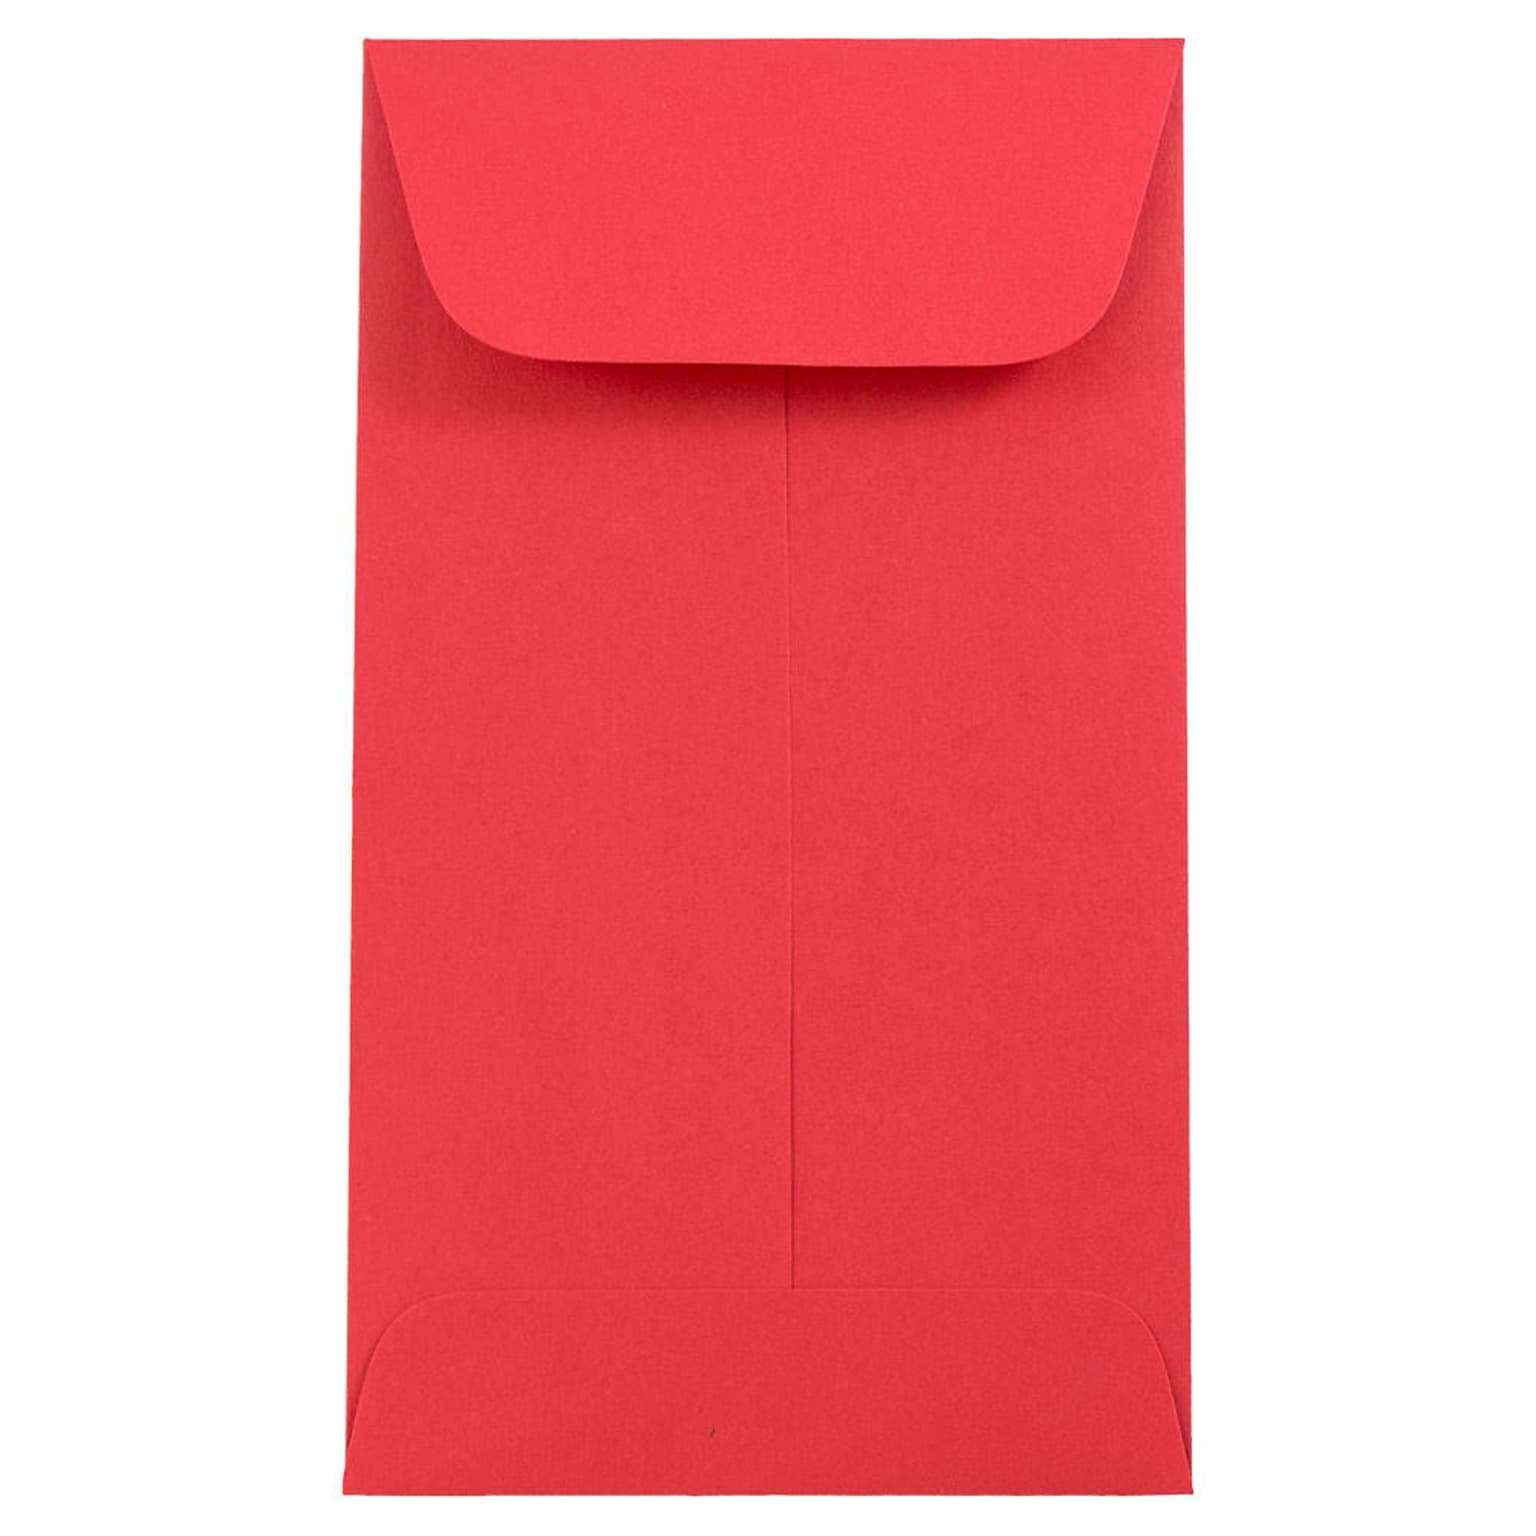 JAM Paper #5.5 Coin Business Colored Envelopes, 3.125 x 5.5, Red Recycled, Bulk 500/Box (356730551H)